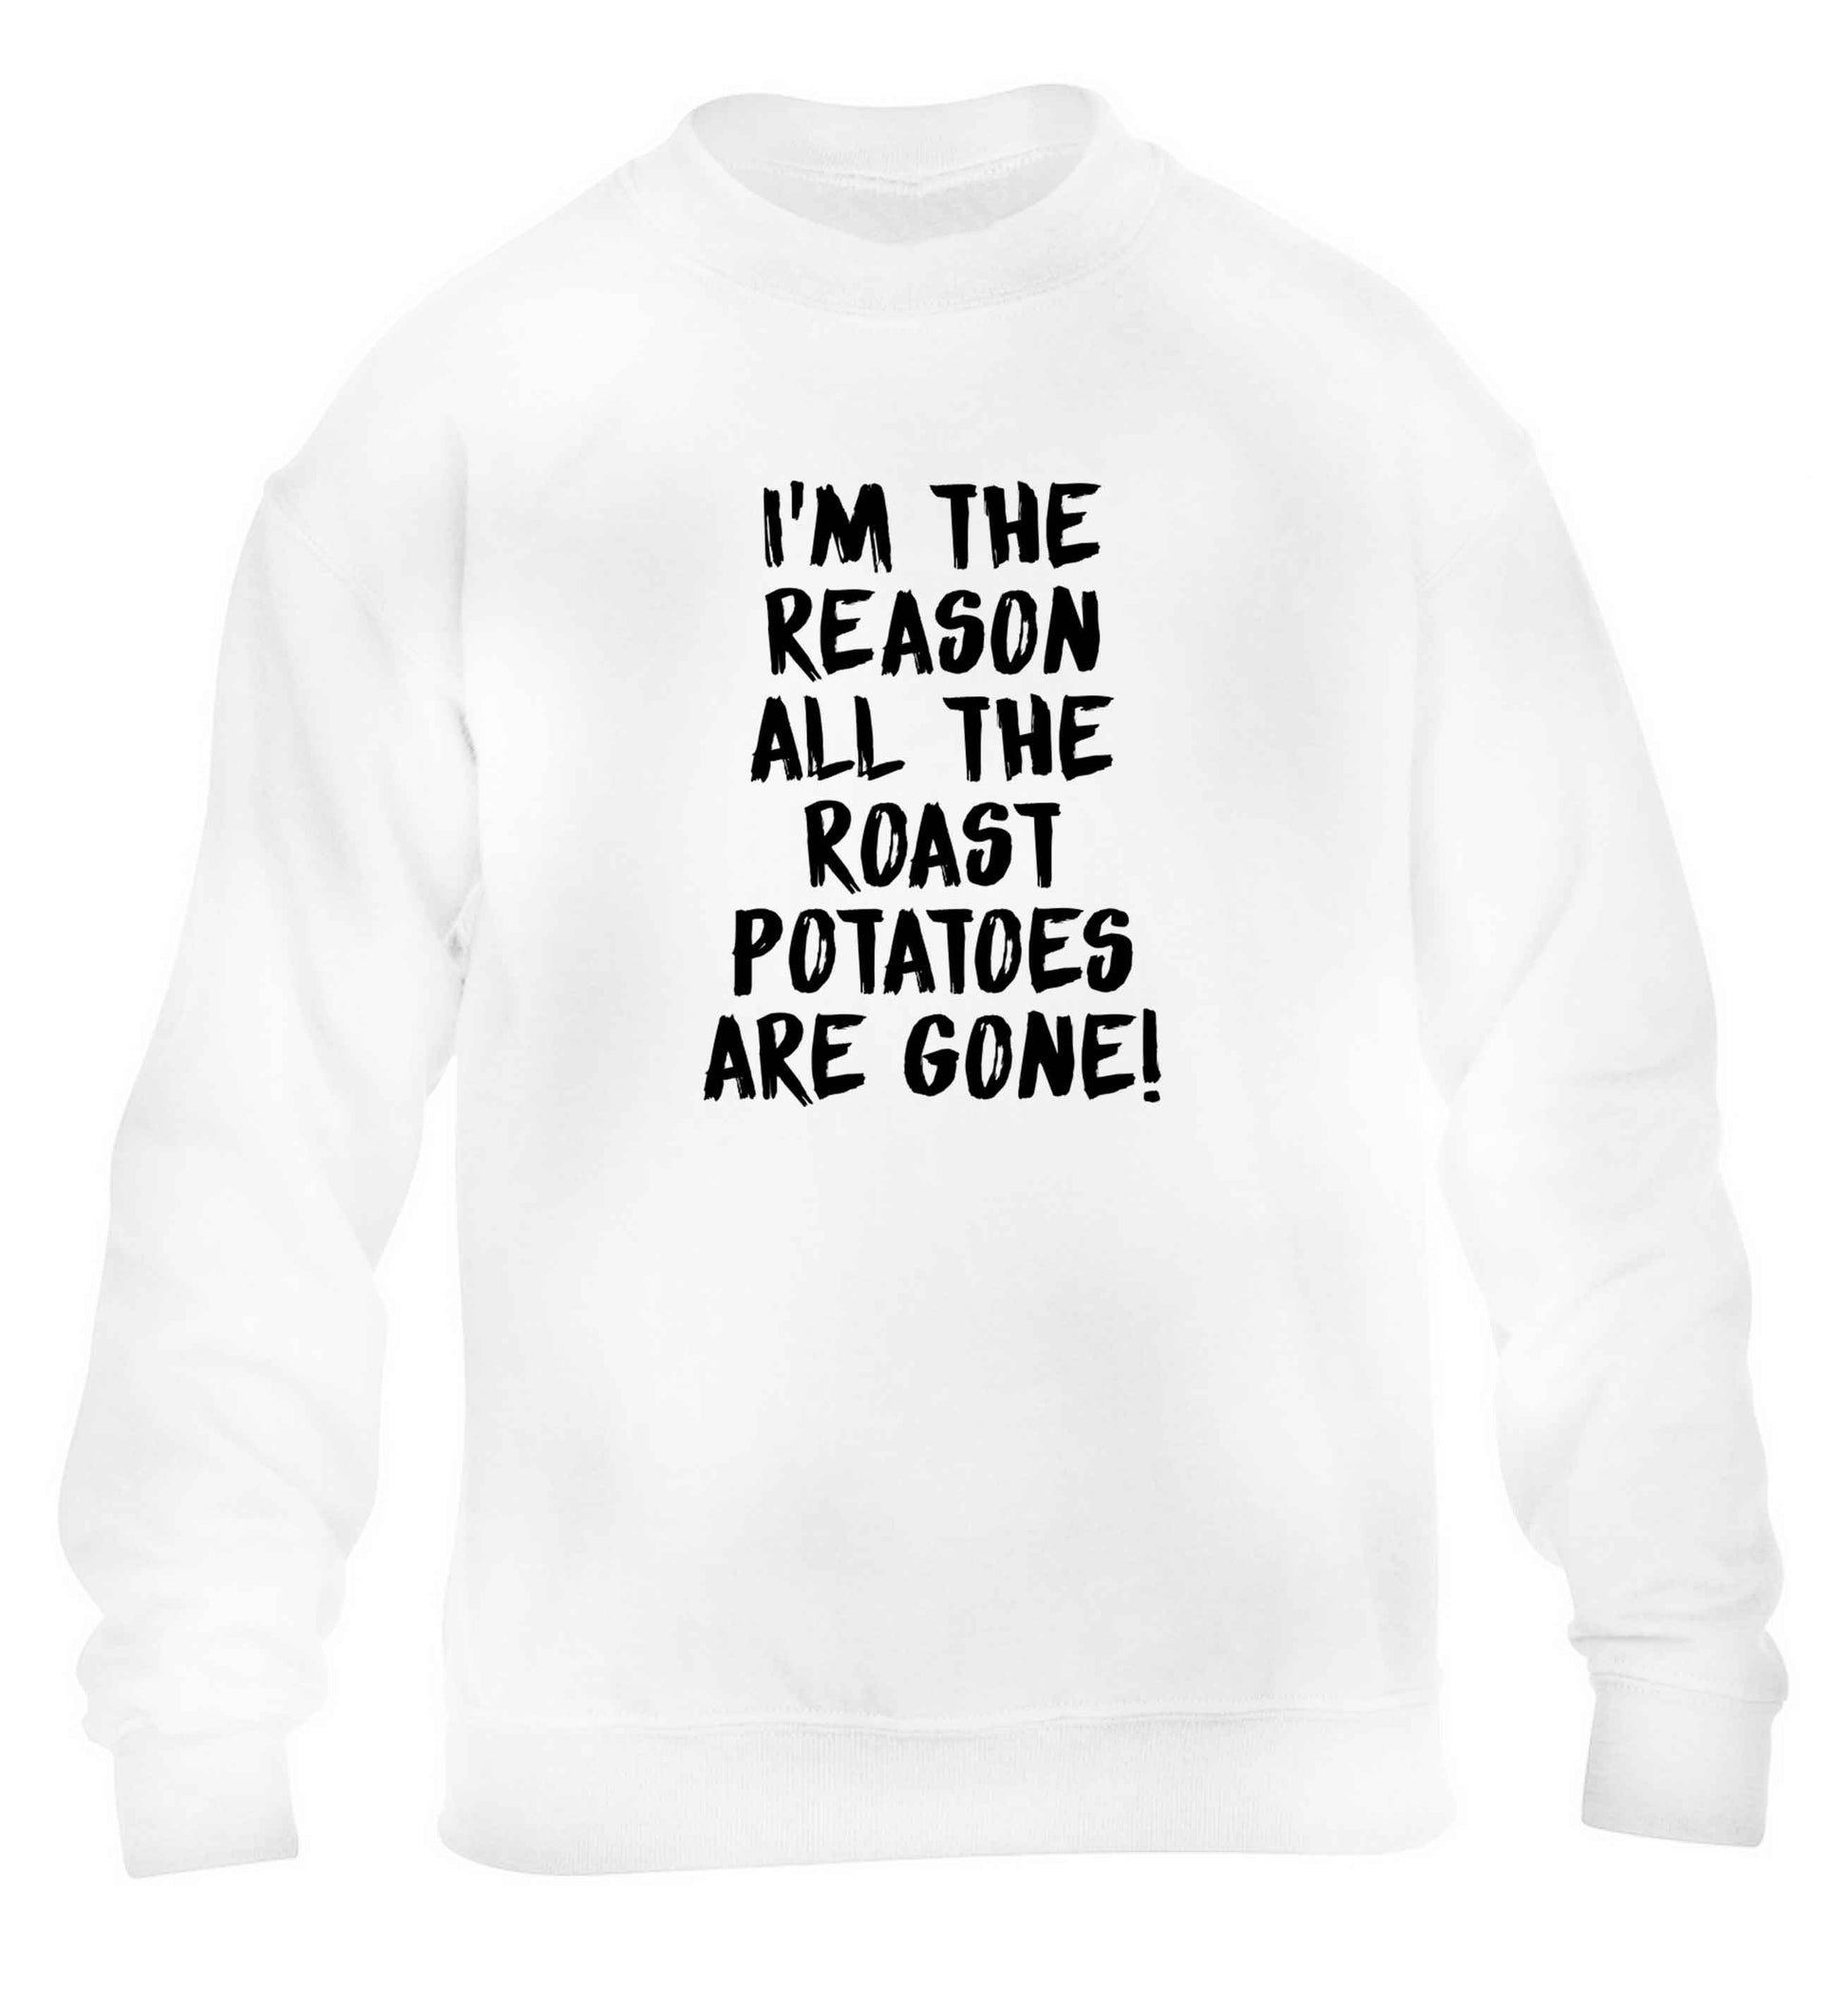 I'm the reason all the roast potatoes are gone children's white sweater 12-13 Years